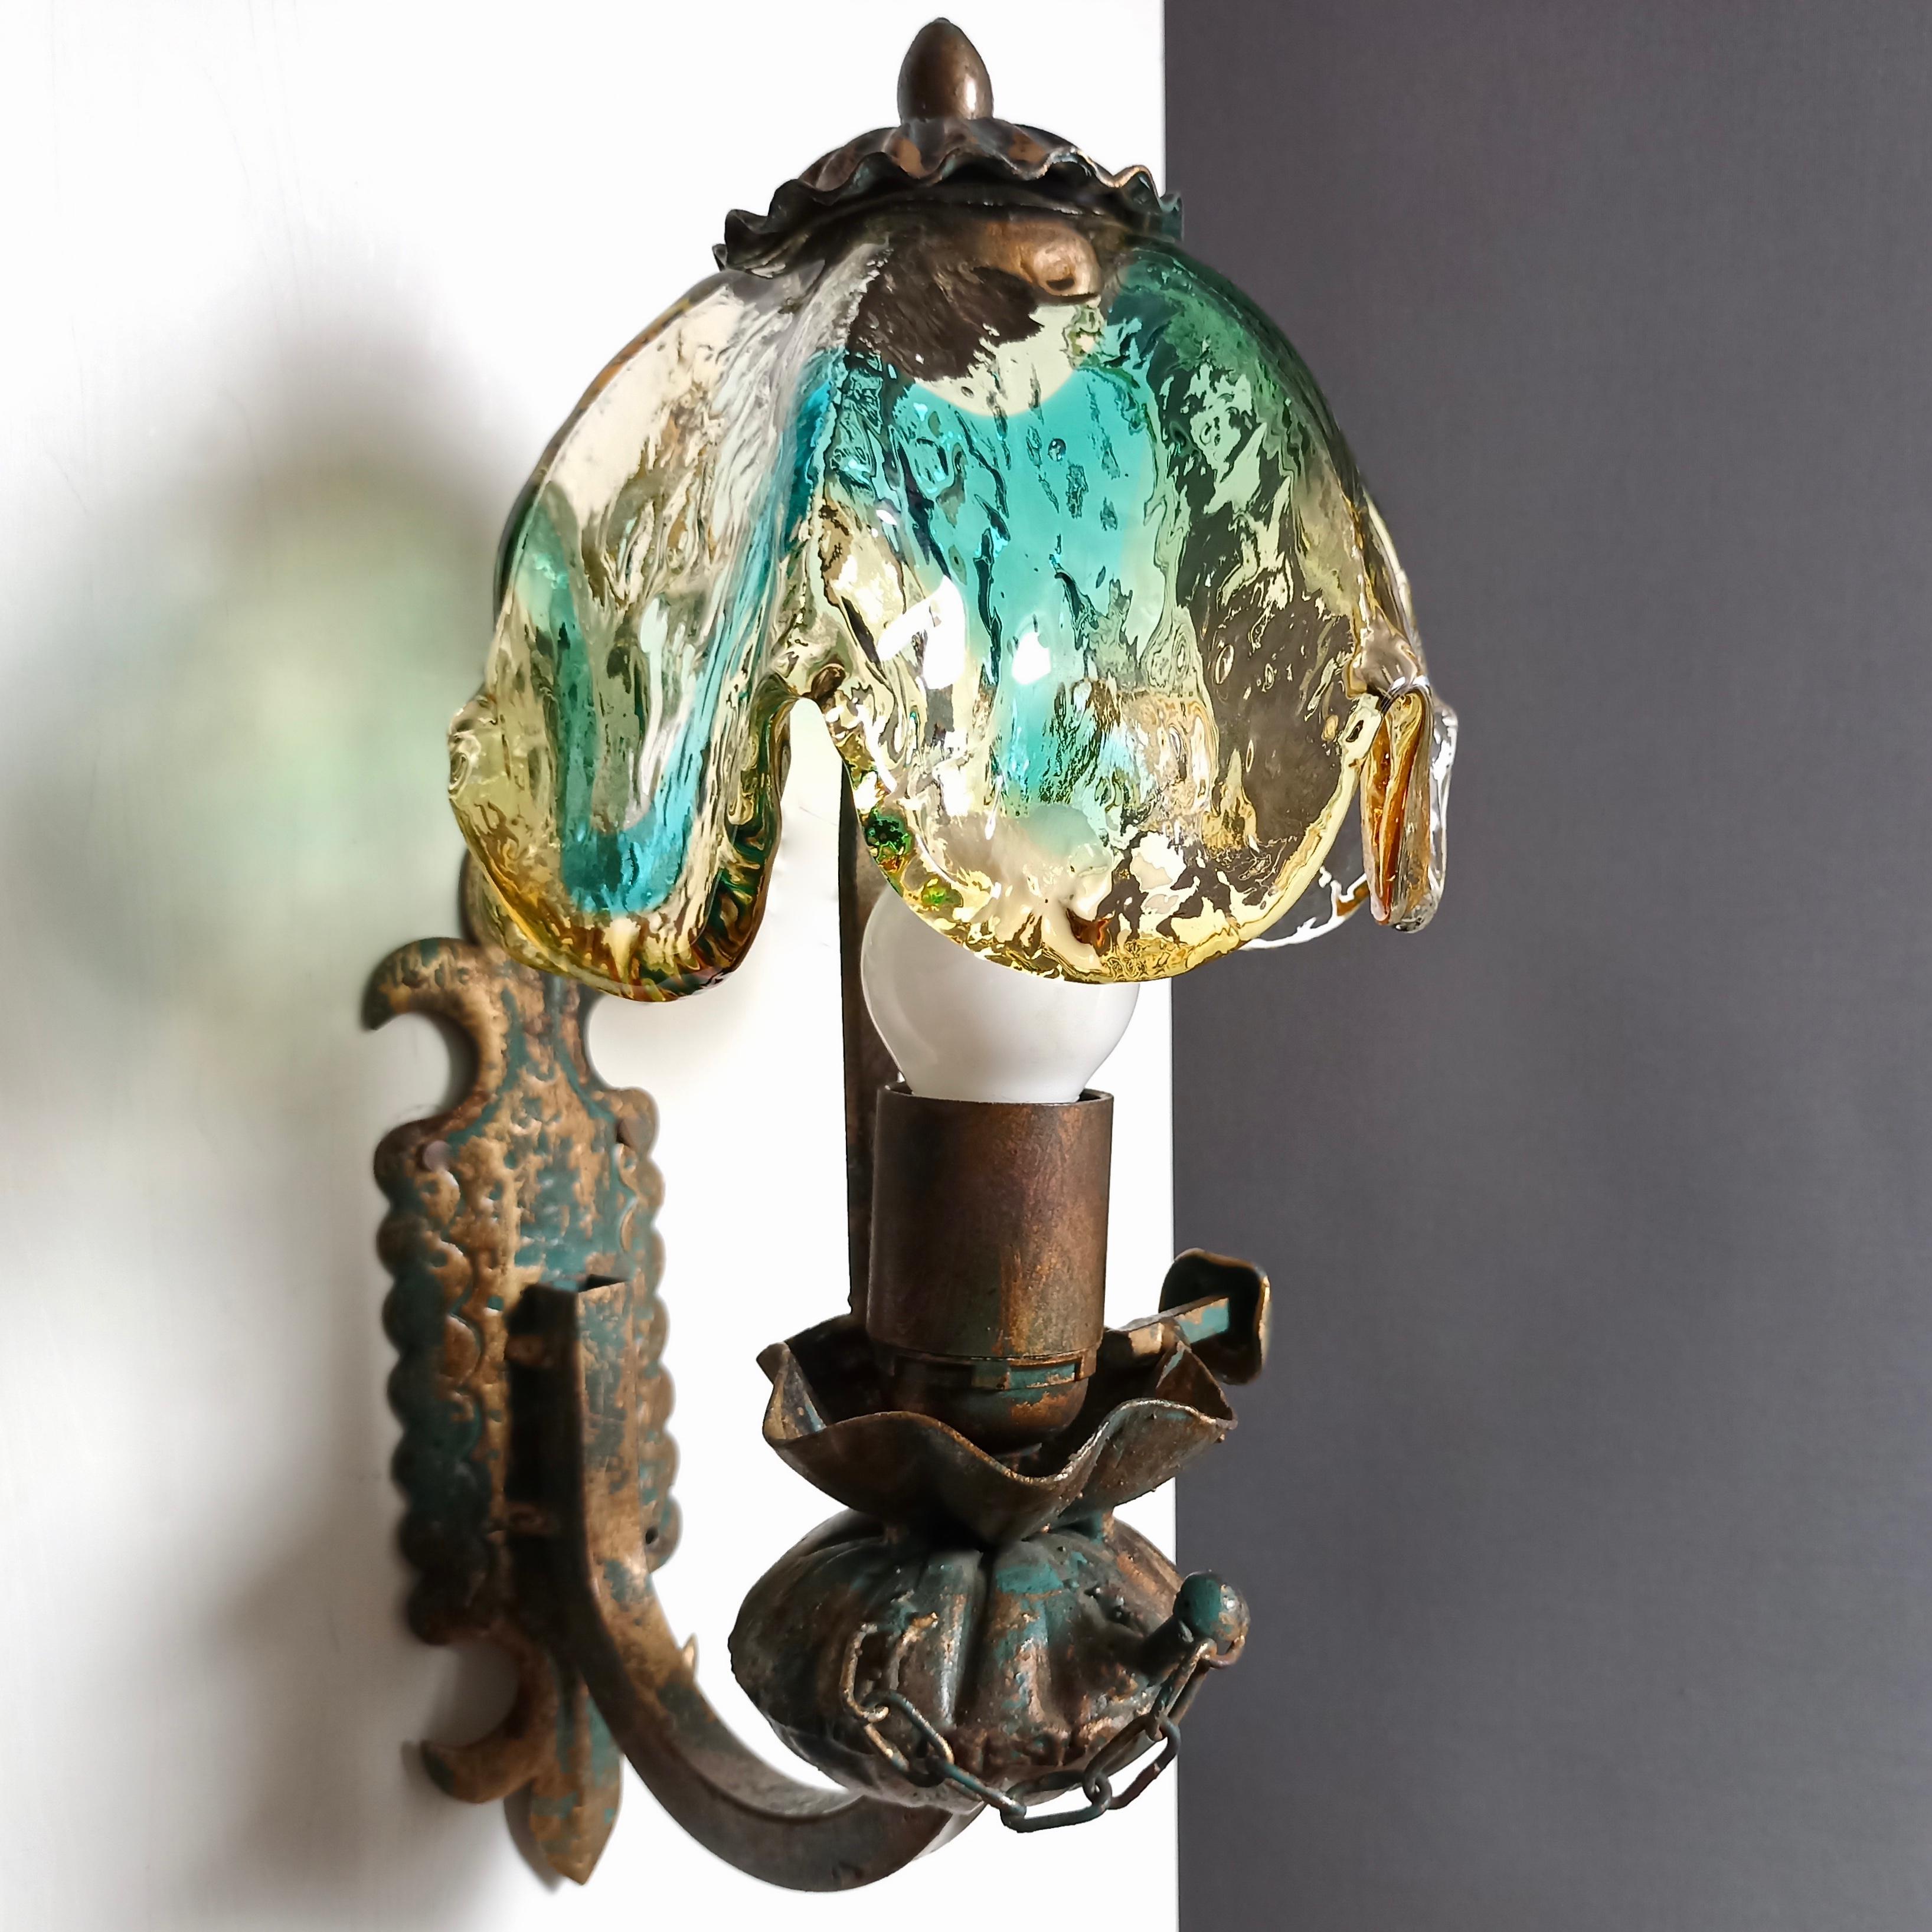 Pair of Italian metal sconces with stunning multicolored Murano glass lampshades, made entirely by hand in a small workshop during 1960s taking the shape of old oil lamps as a model. Because of the manual and non-serial workmanship, each of the two